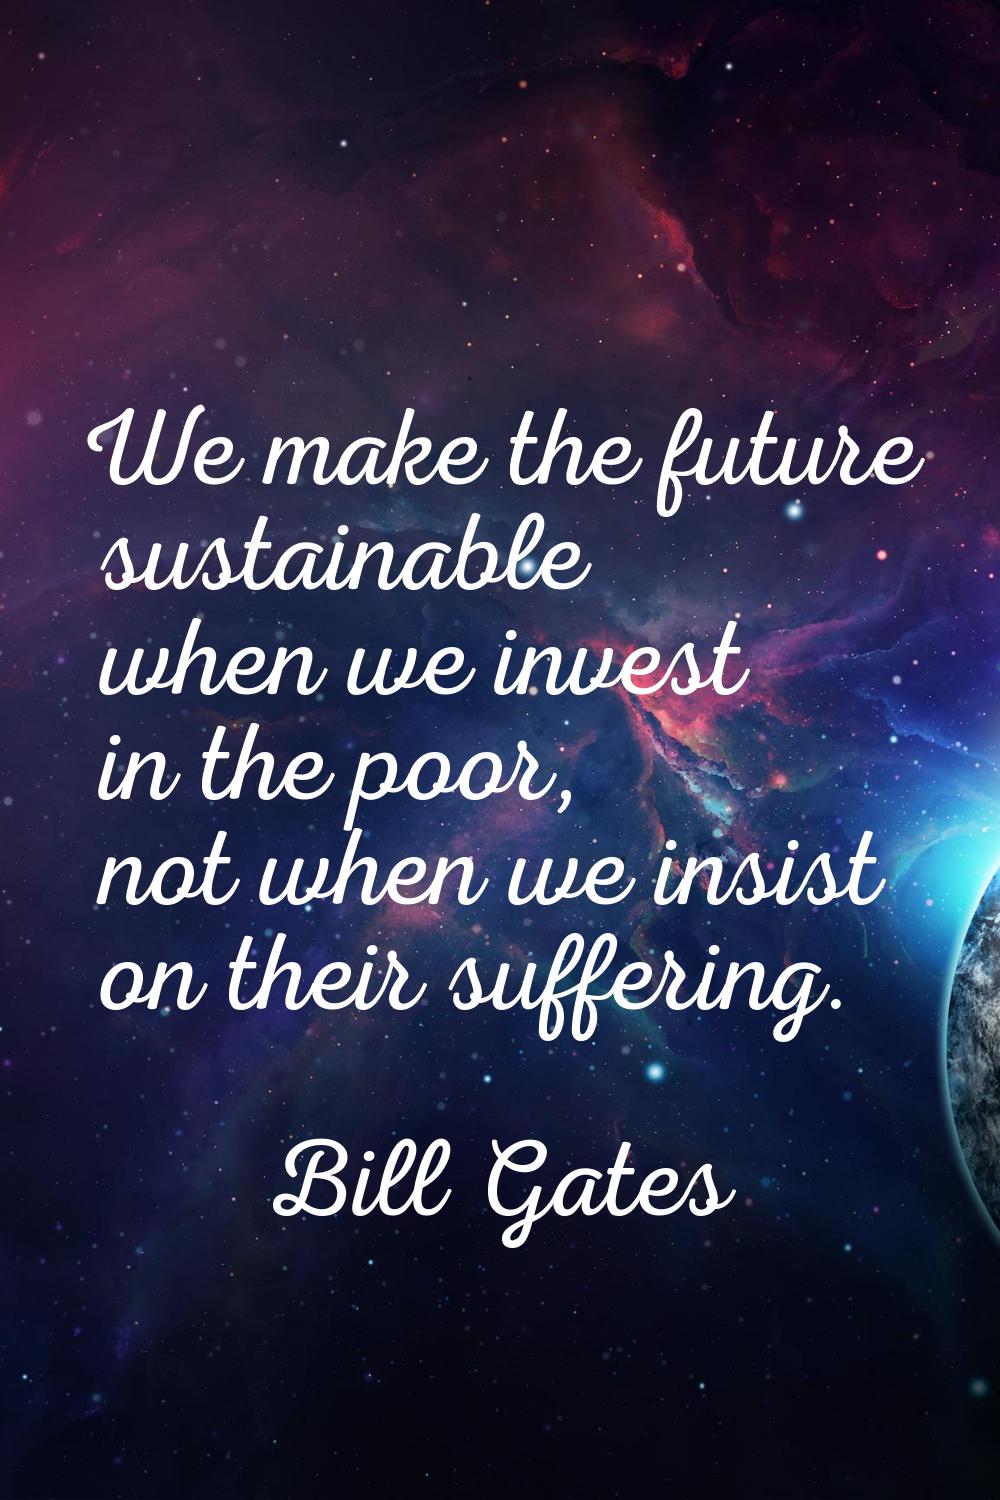 We make the future sustainable when we invest in the poor, not when we insist on their suffering.